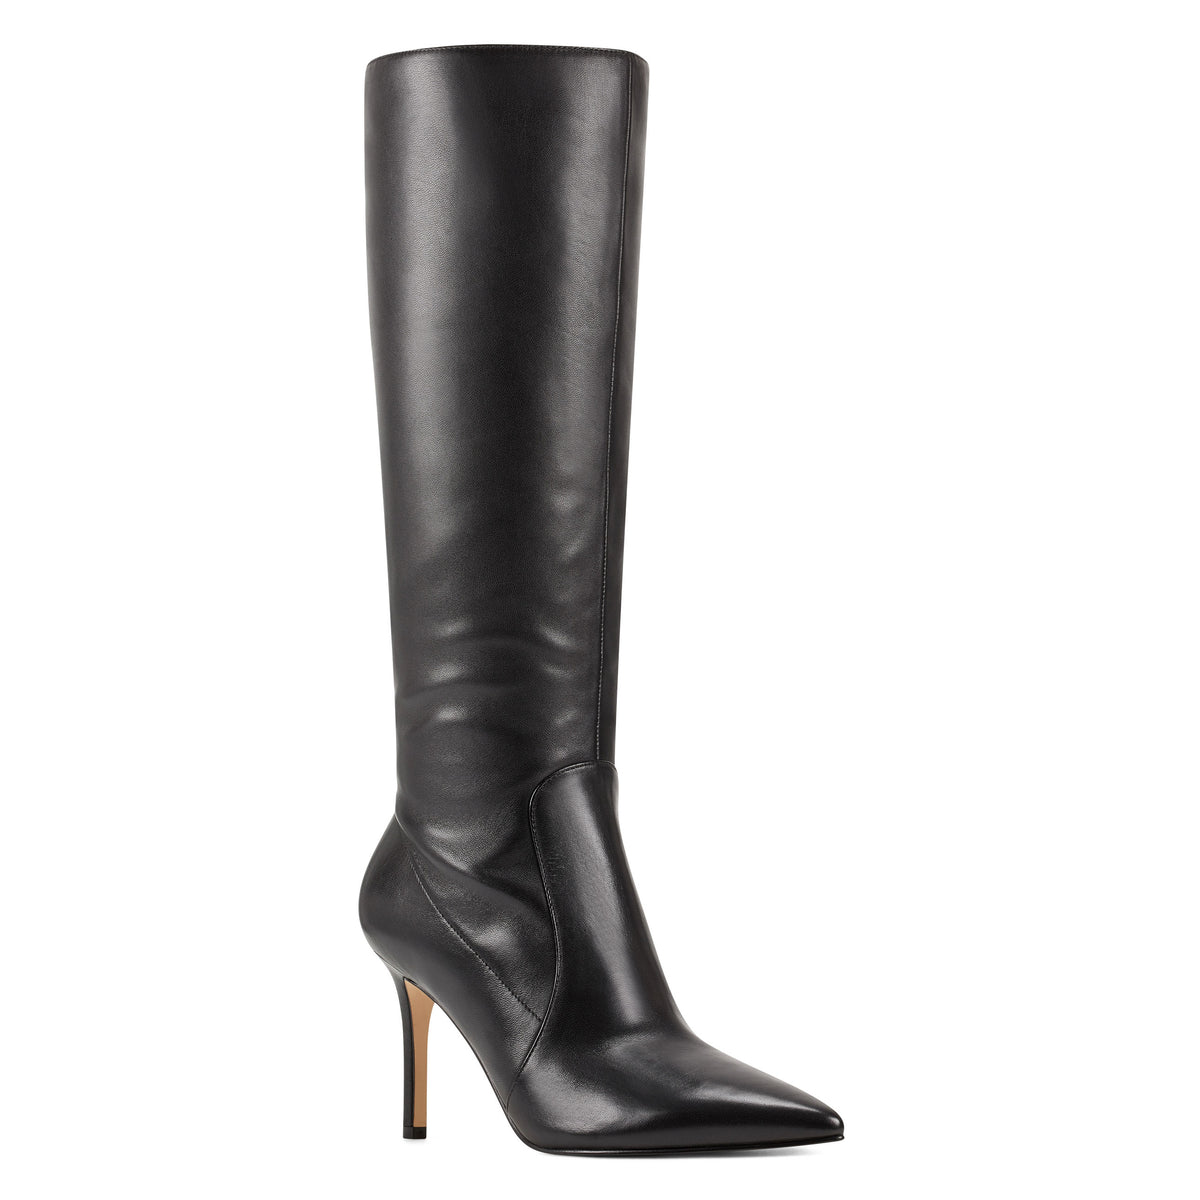 Fivera Pointy Toe Boot - Nine West